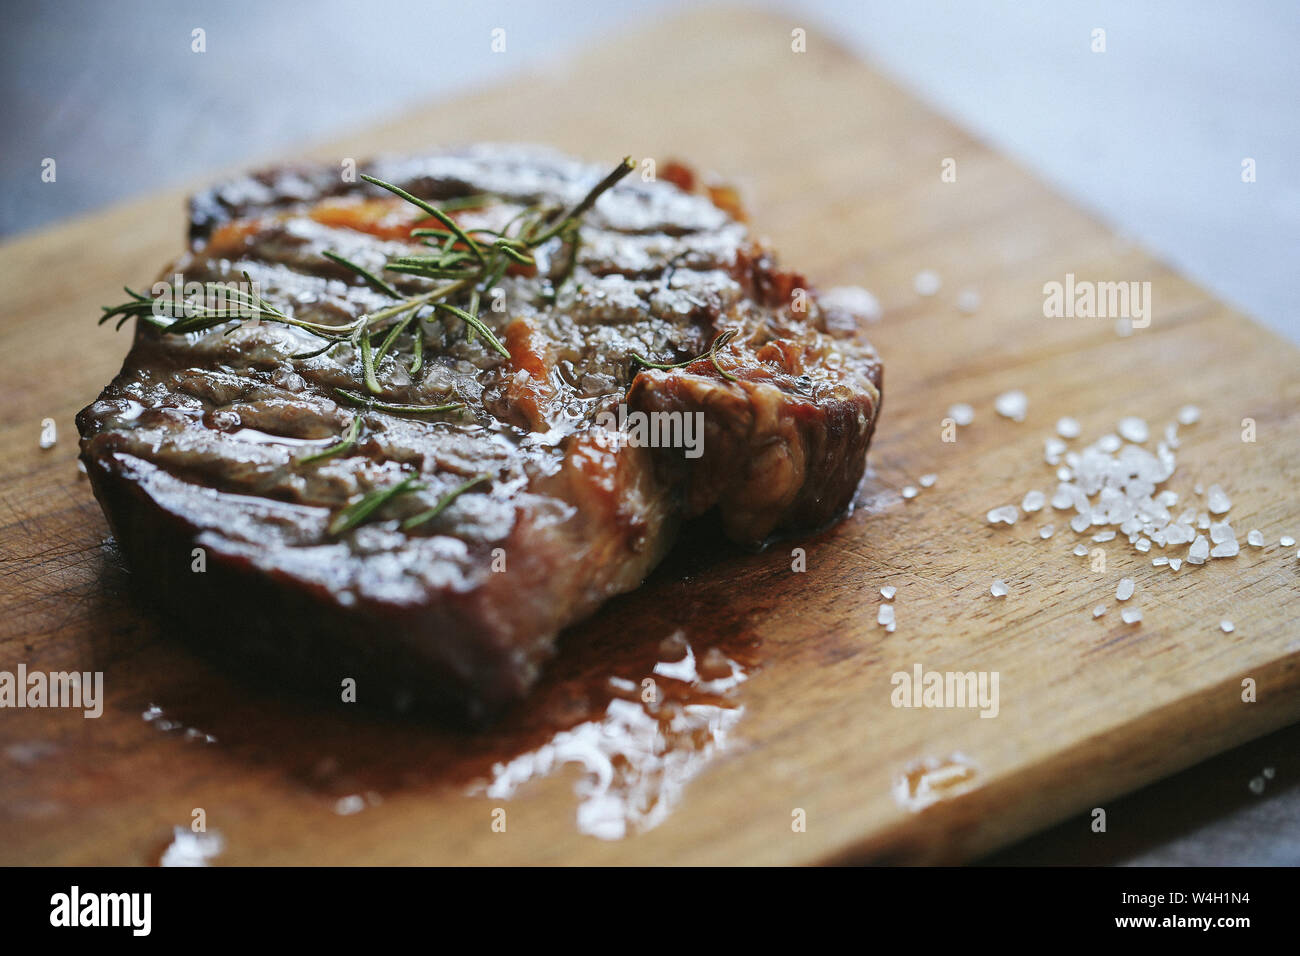 Cooking, meat preparation. Steak on the table Stock Photo